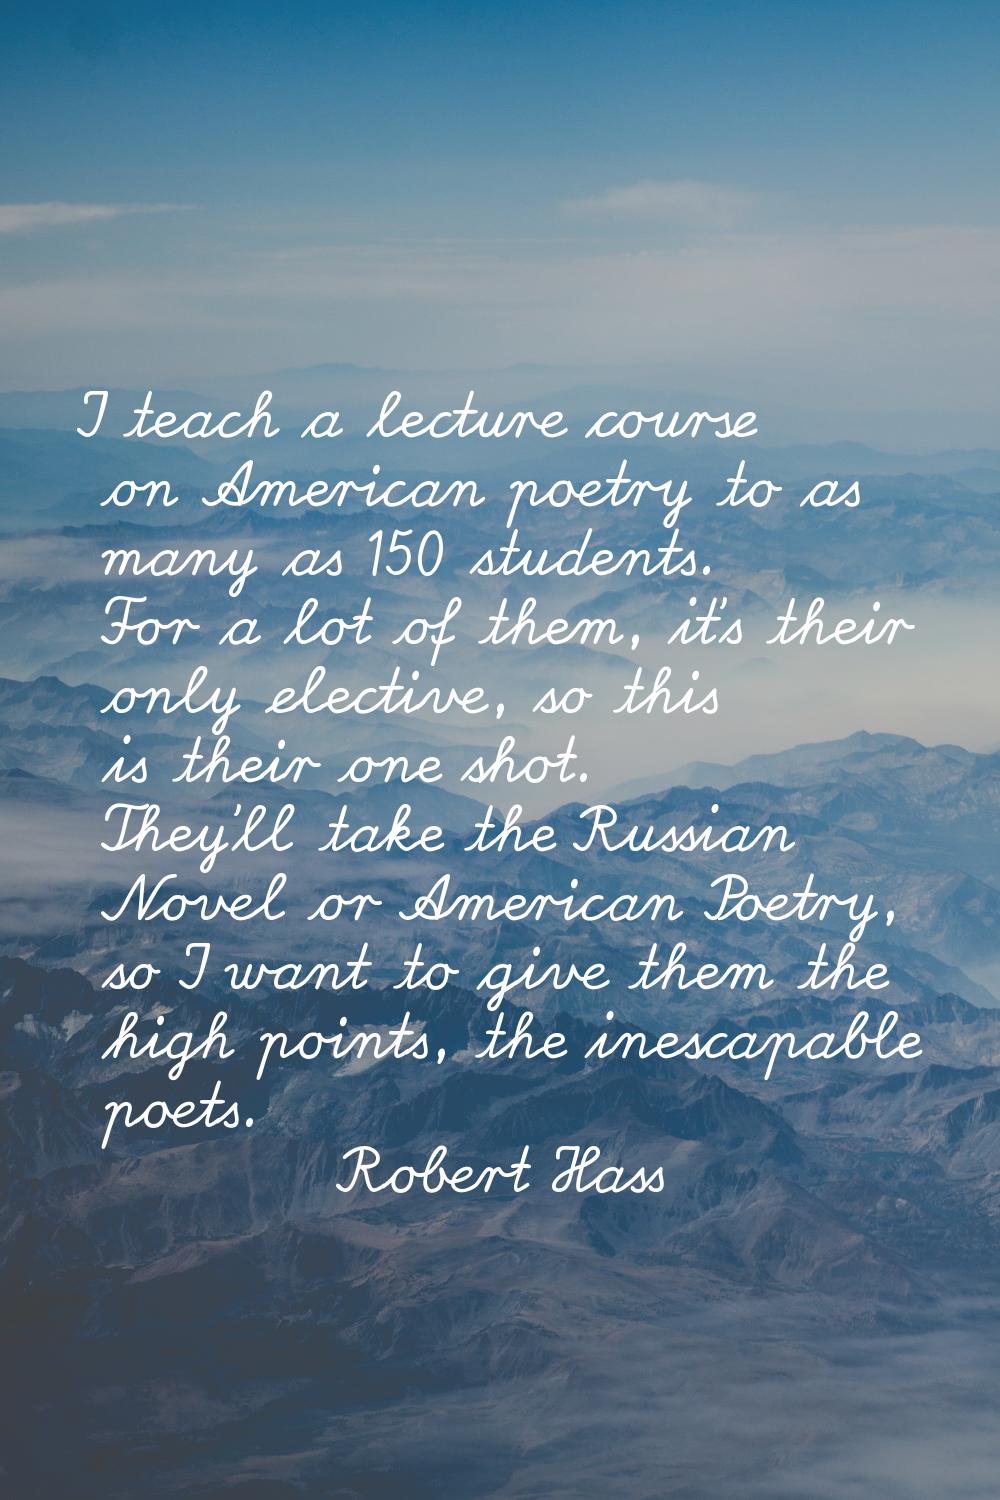 I teach a lecture course on American poetry to as many as 150 students. For a lot of them, it's the